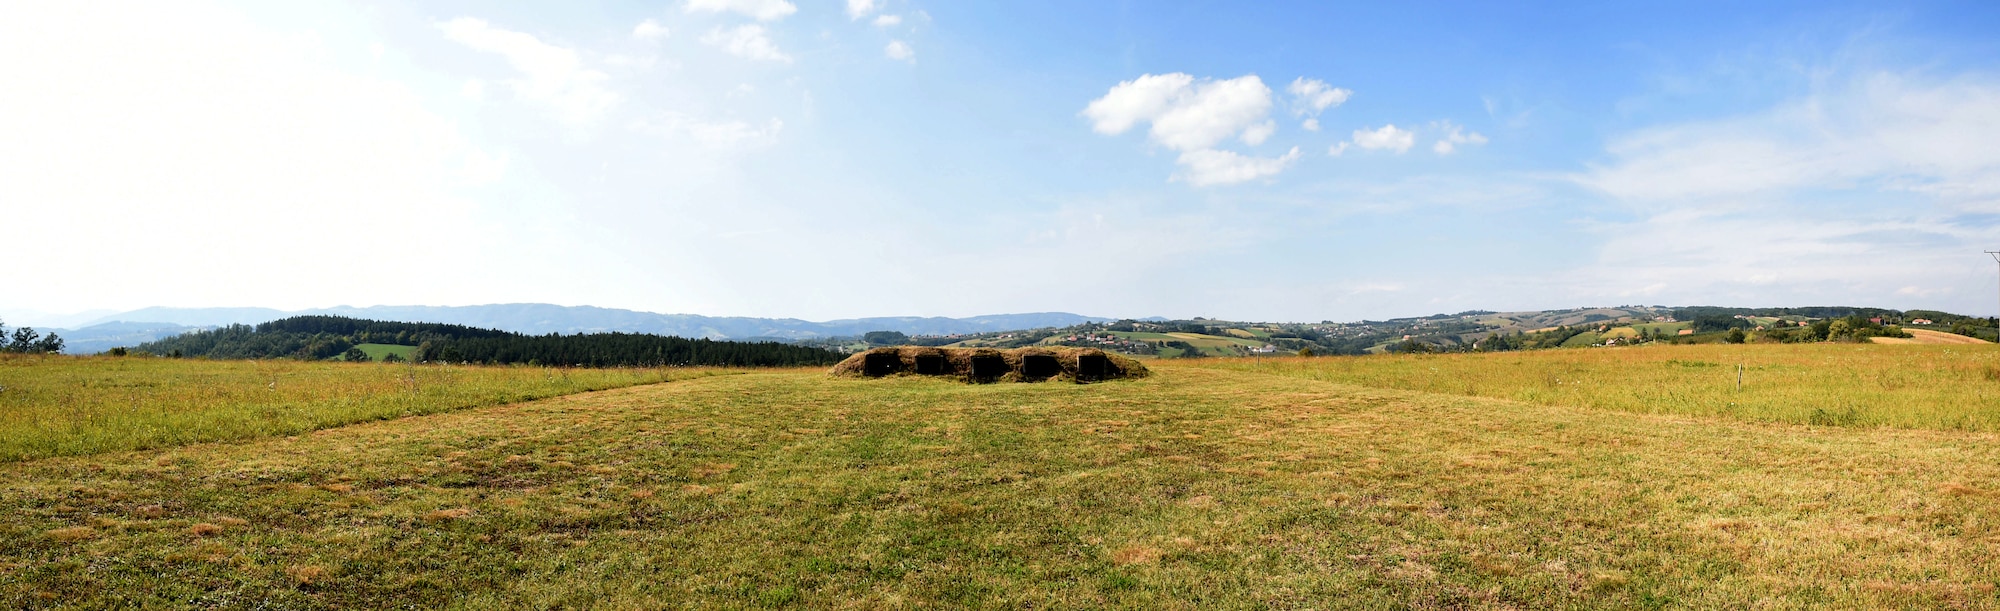 The 74th anniversarry of the Halyard Mission took place in this field outside Pranjani, Serbia, Sept. 22, 2018. Fields like this were used from Aug 1944 to Feb 1945, with the help of the Serbian population and the Yugoslav Armed Forces in the Homeland, to transport more than 500 U.S. and allied airmen from improvised runways in Serbia and Bosnia and Herzegovina to U.S. airbases in Italy. (U.S. Air Force photo by TSgt Stephen Ocenosak)